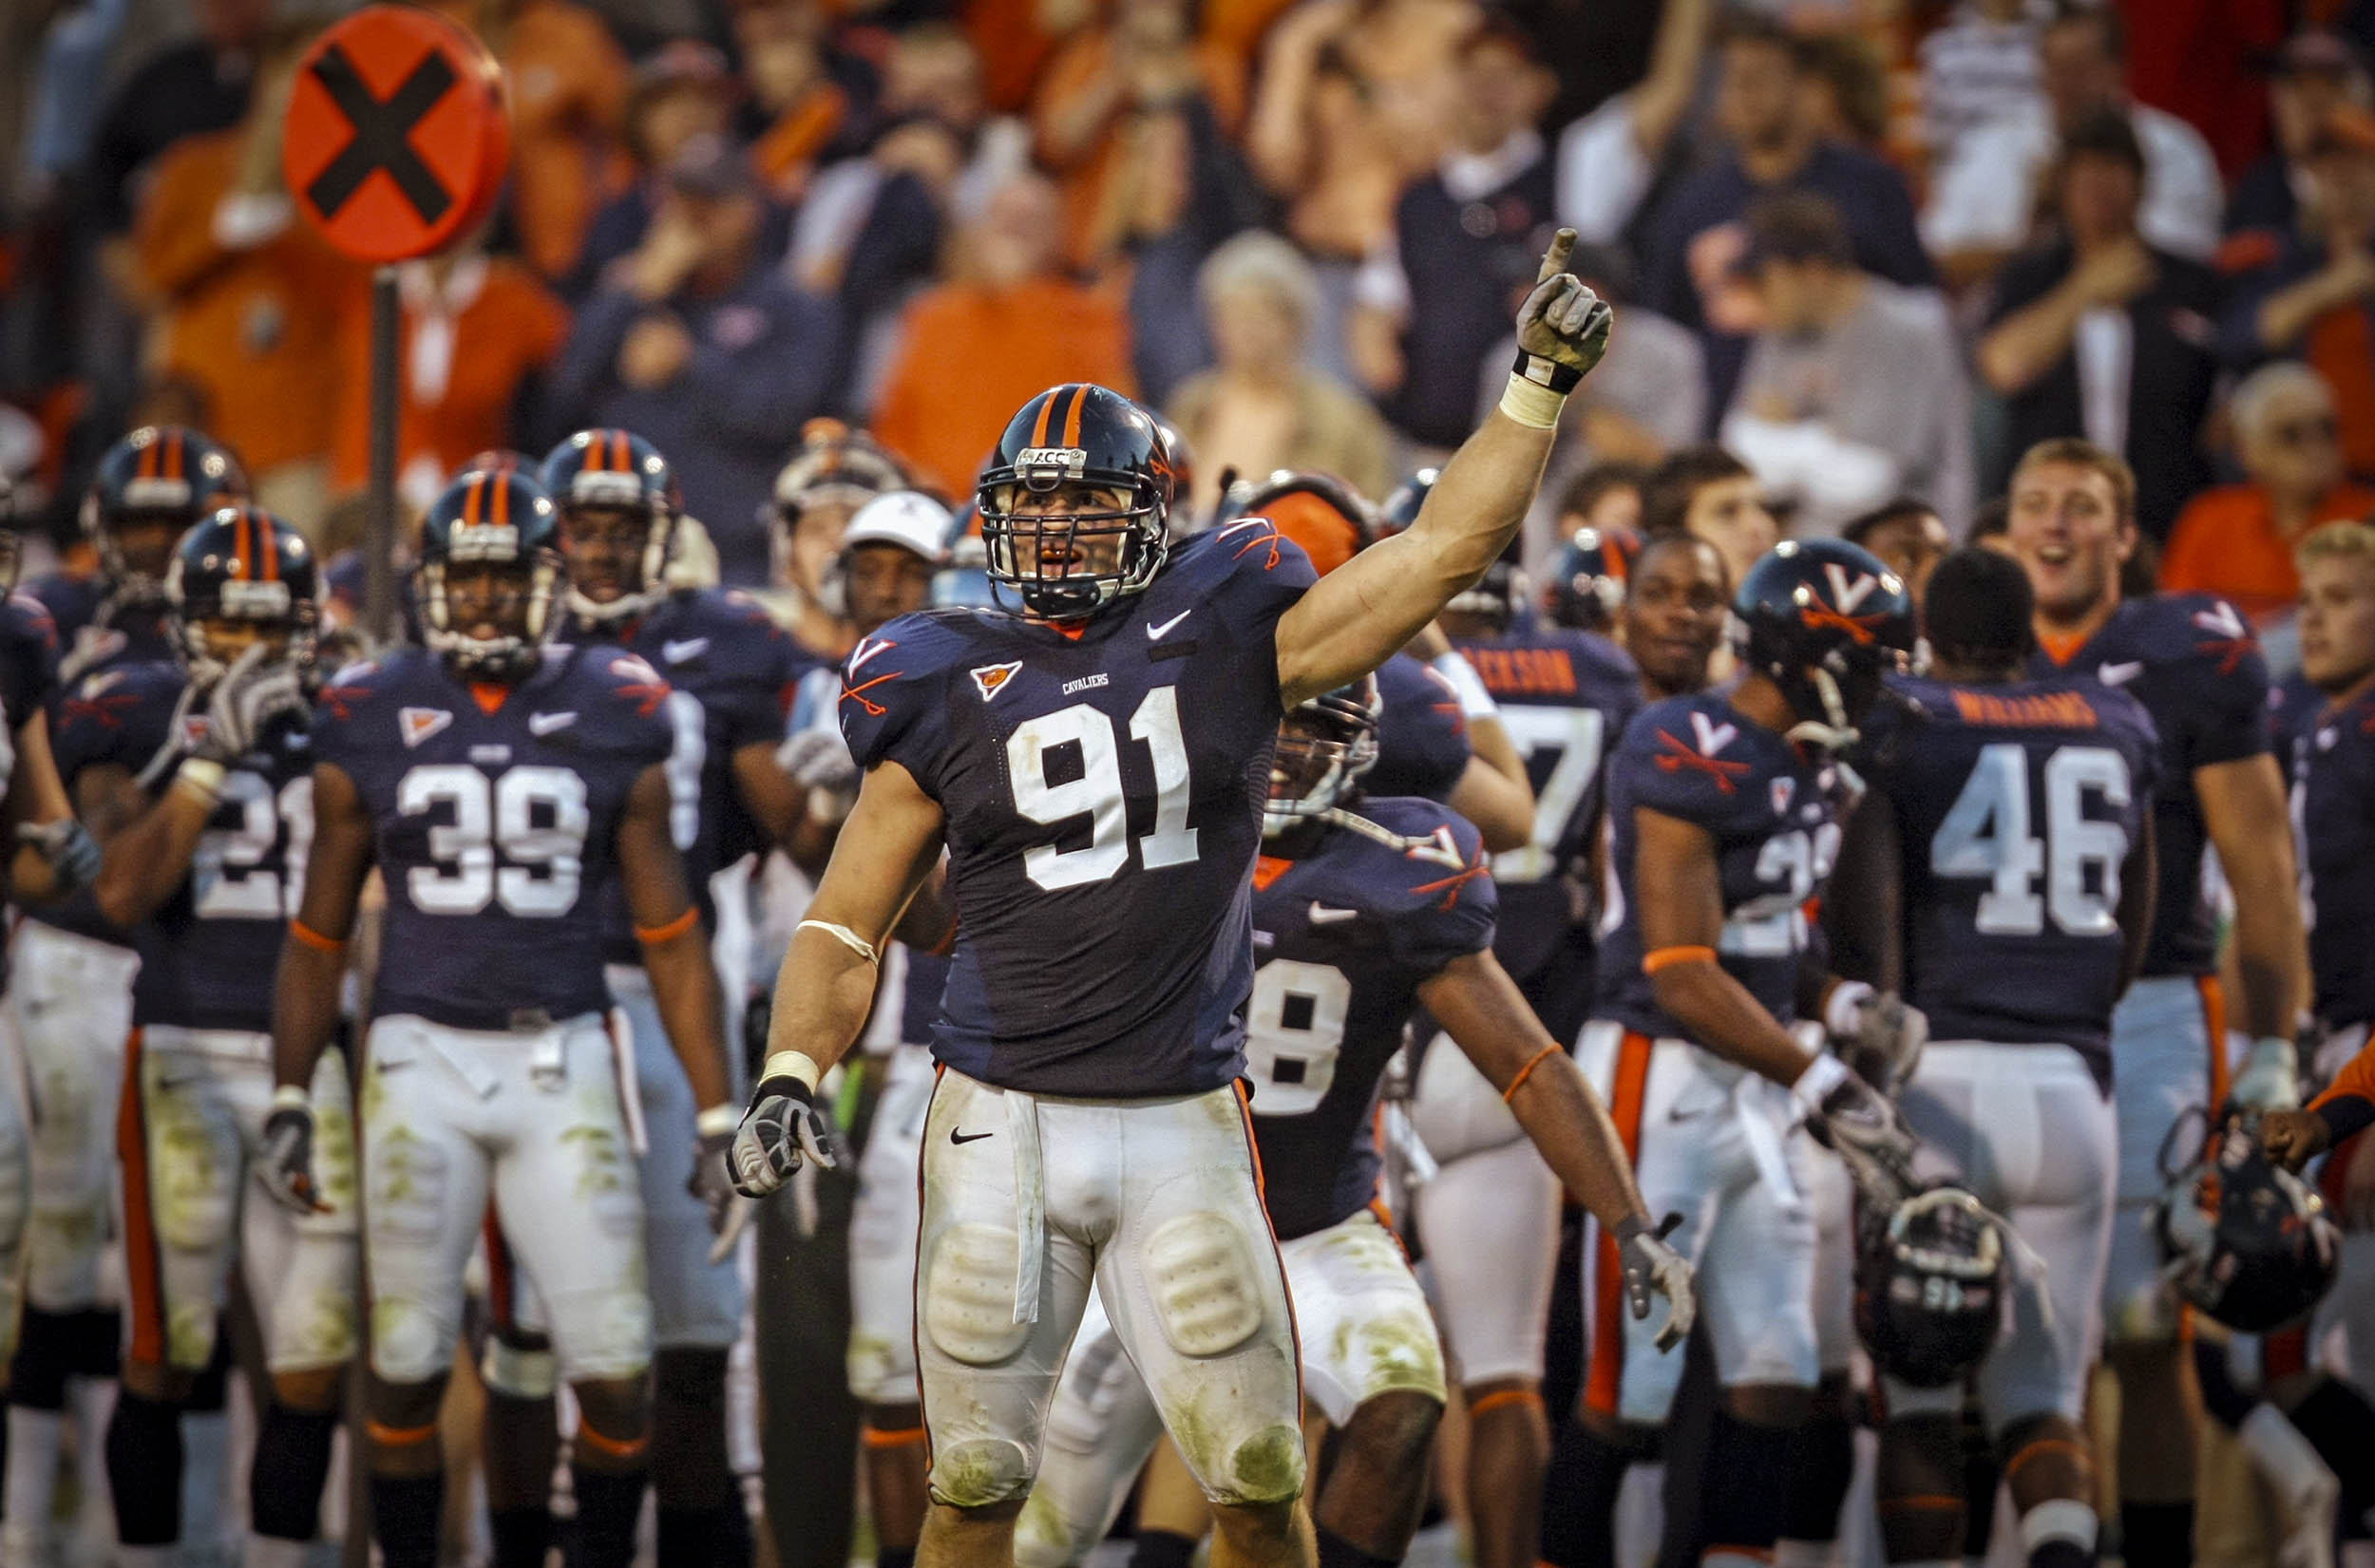 UVA football team standing together with Chris Long in front of everyone whit is left arm raised in the air